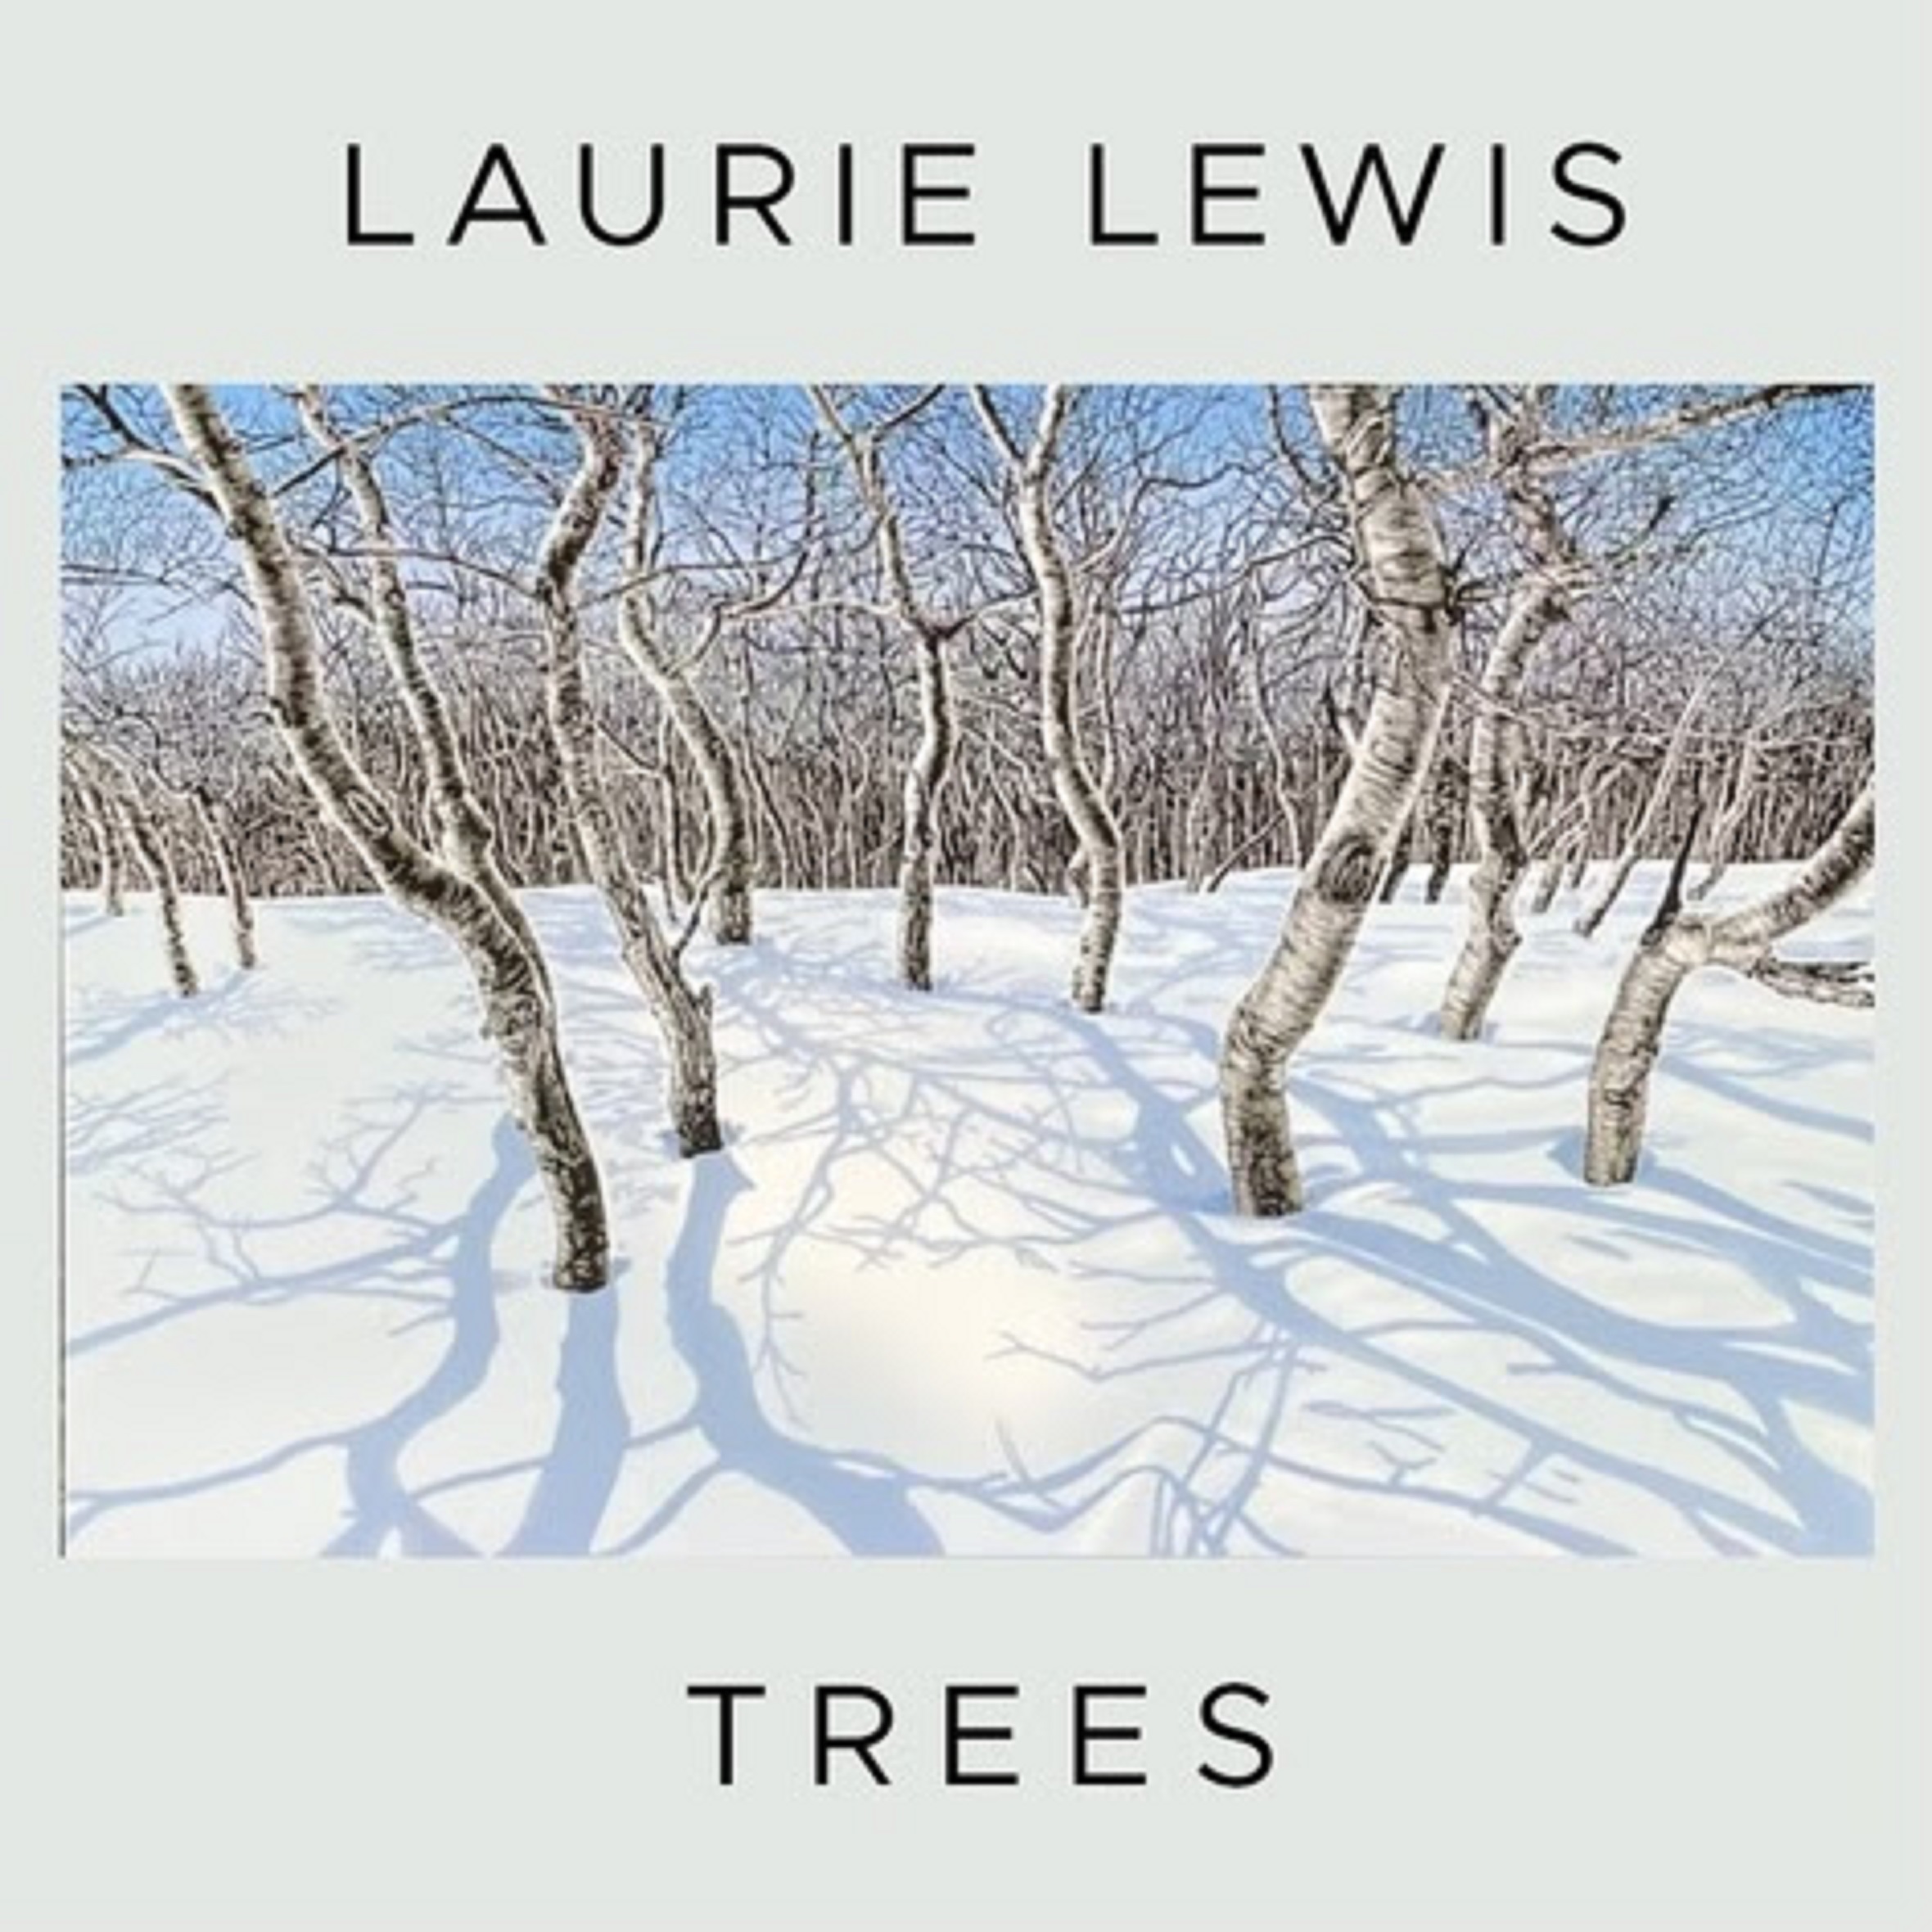 Laurie Lewis Releases “Long Gone” as the First Single From Her Upcoming TREES Album